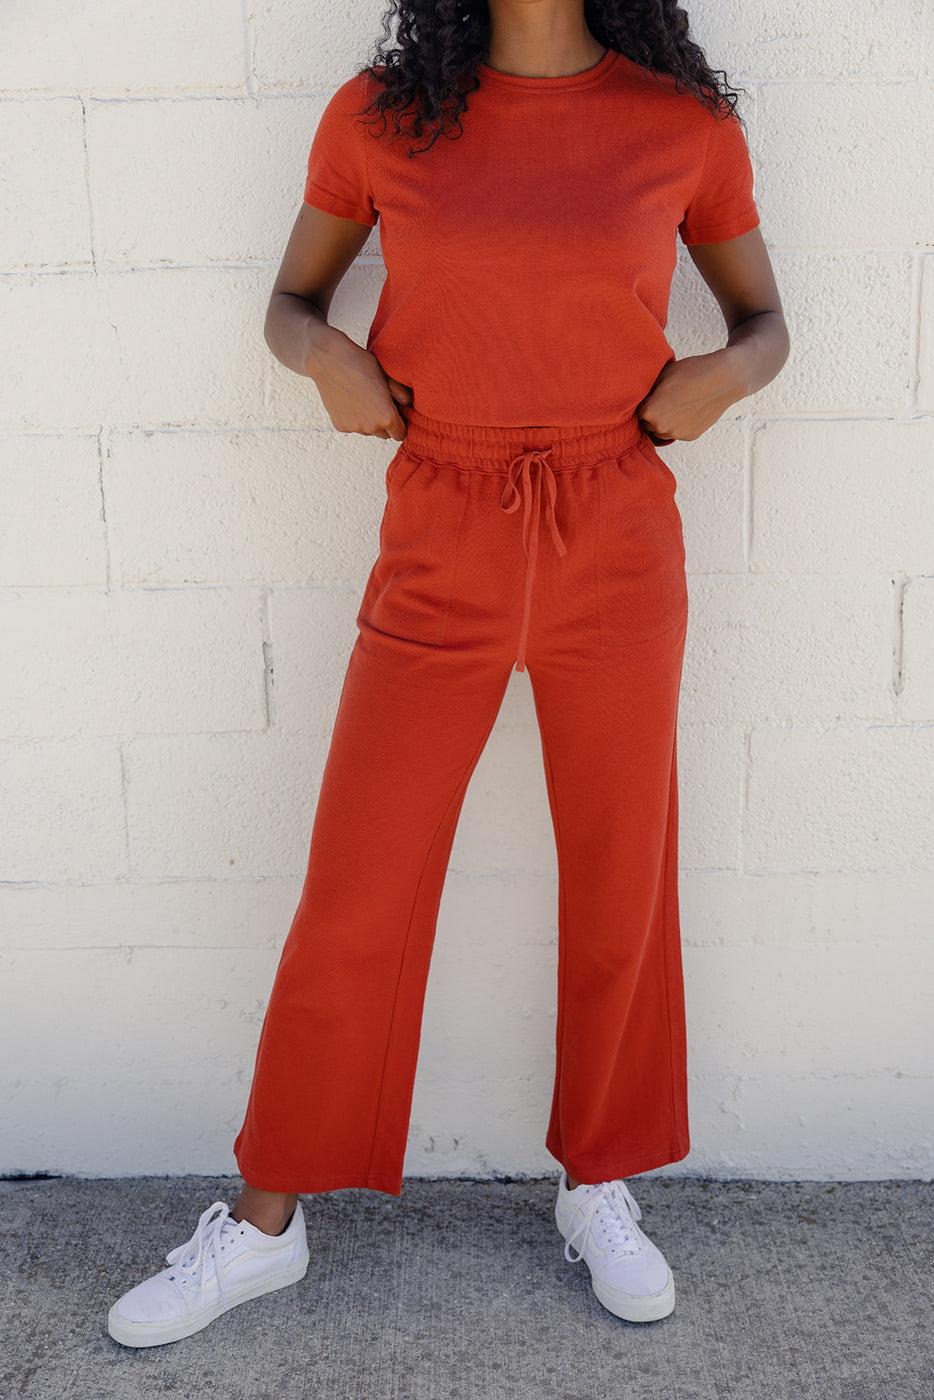 a woman in red pants and a shirt